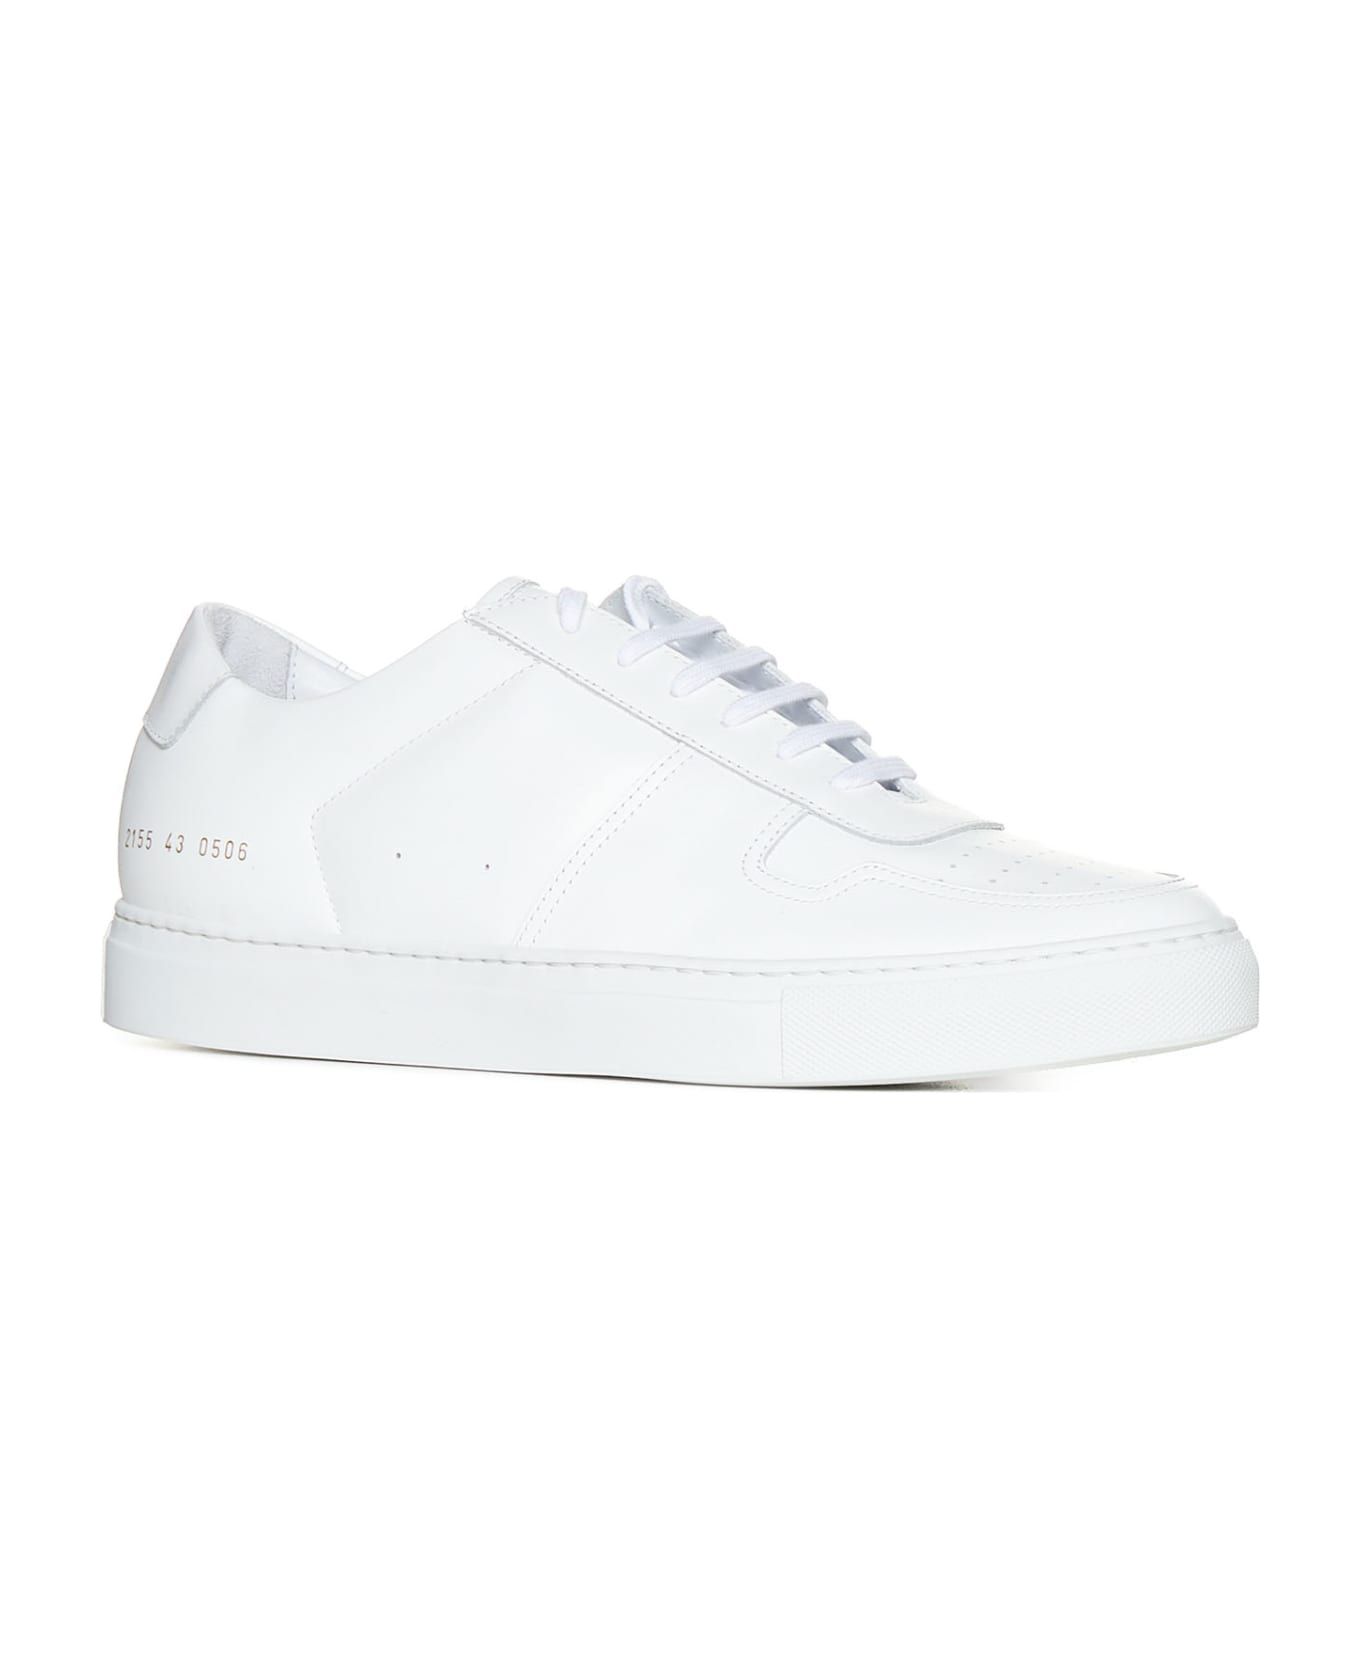 Common Projects Bball Low Sneakers - White